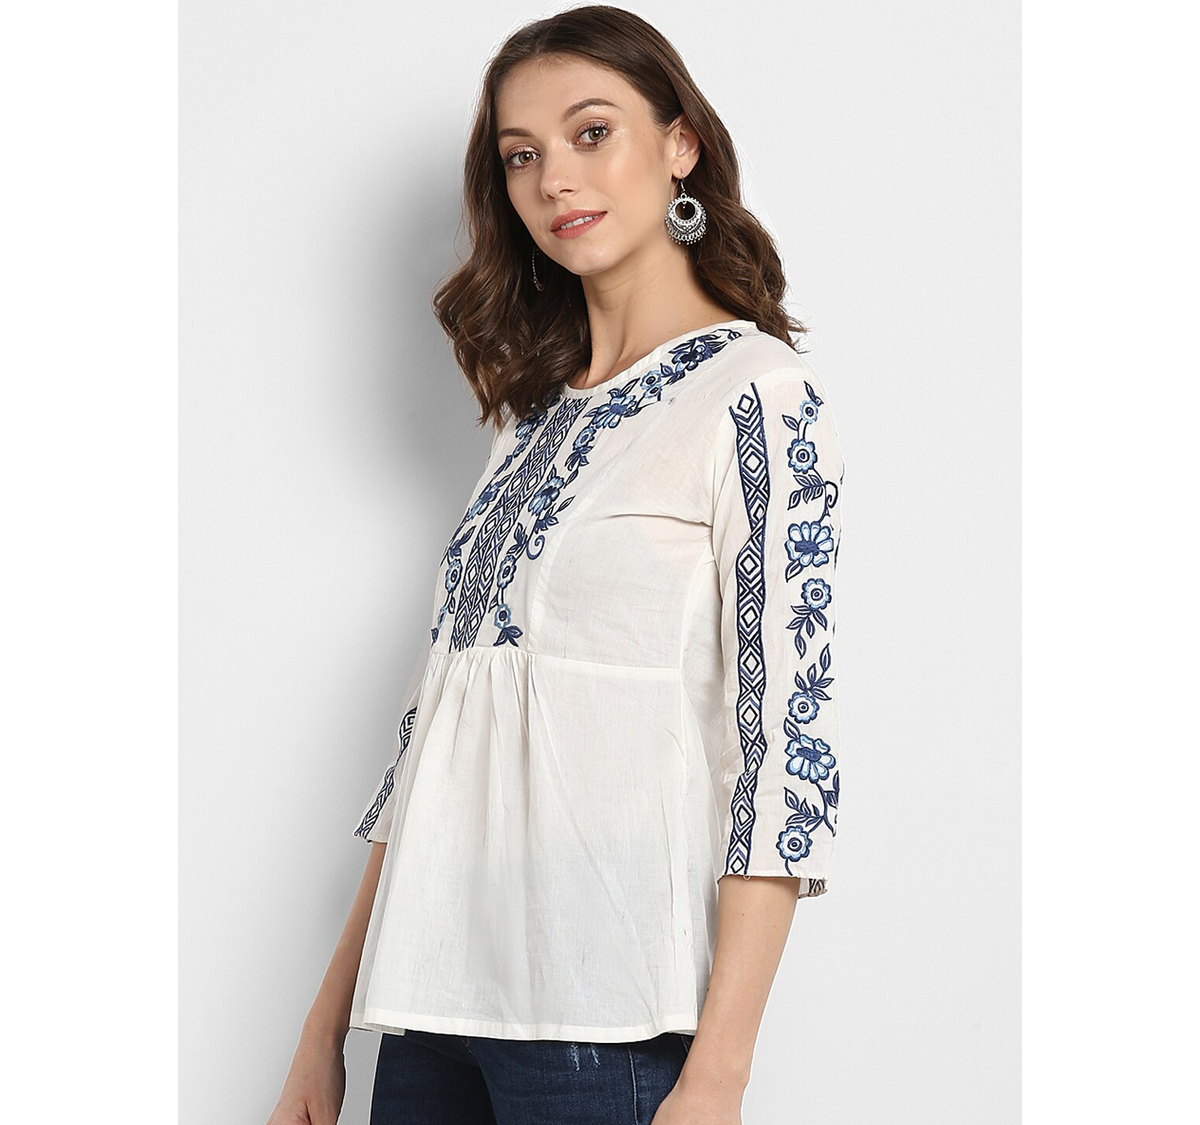 Women's Off White Embellished A-Line Top2 - Wahe-NOOR